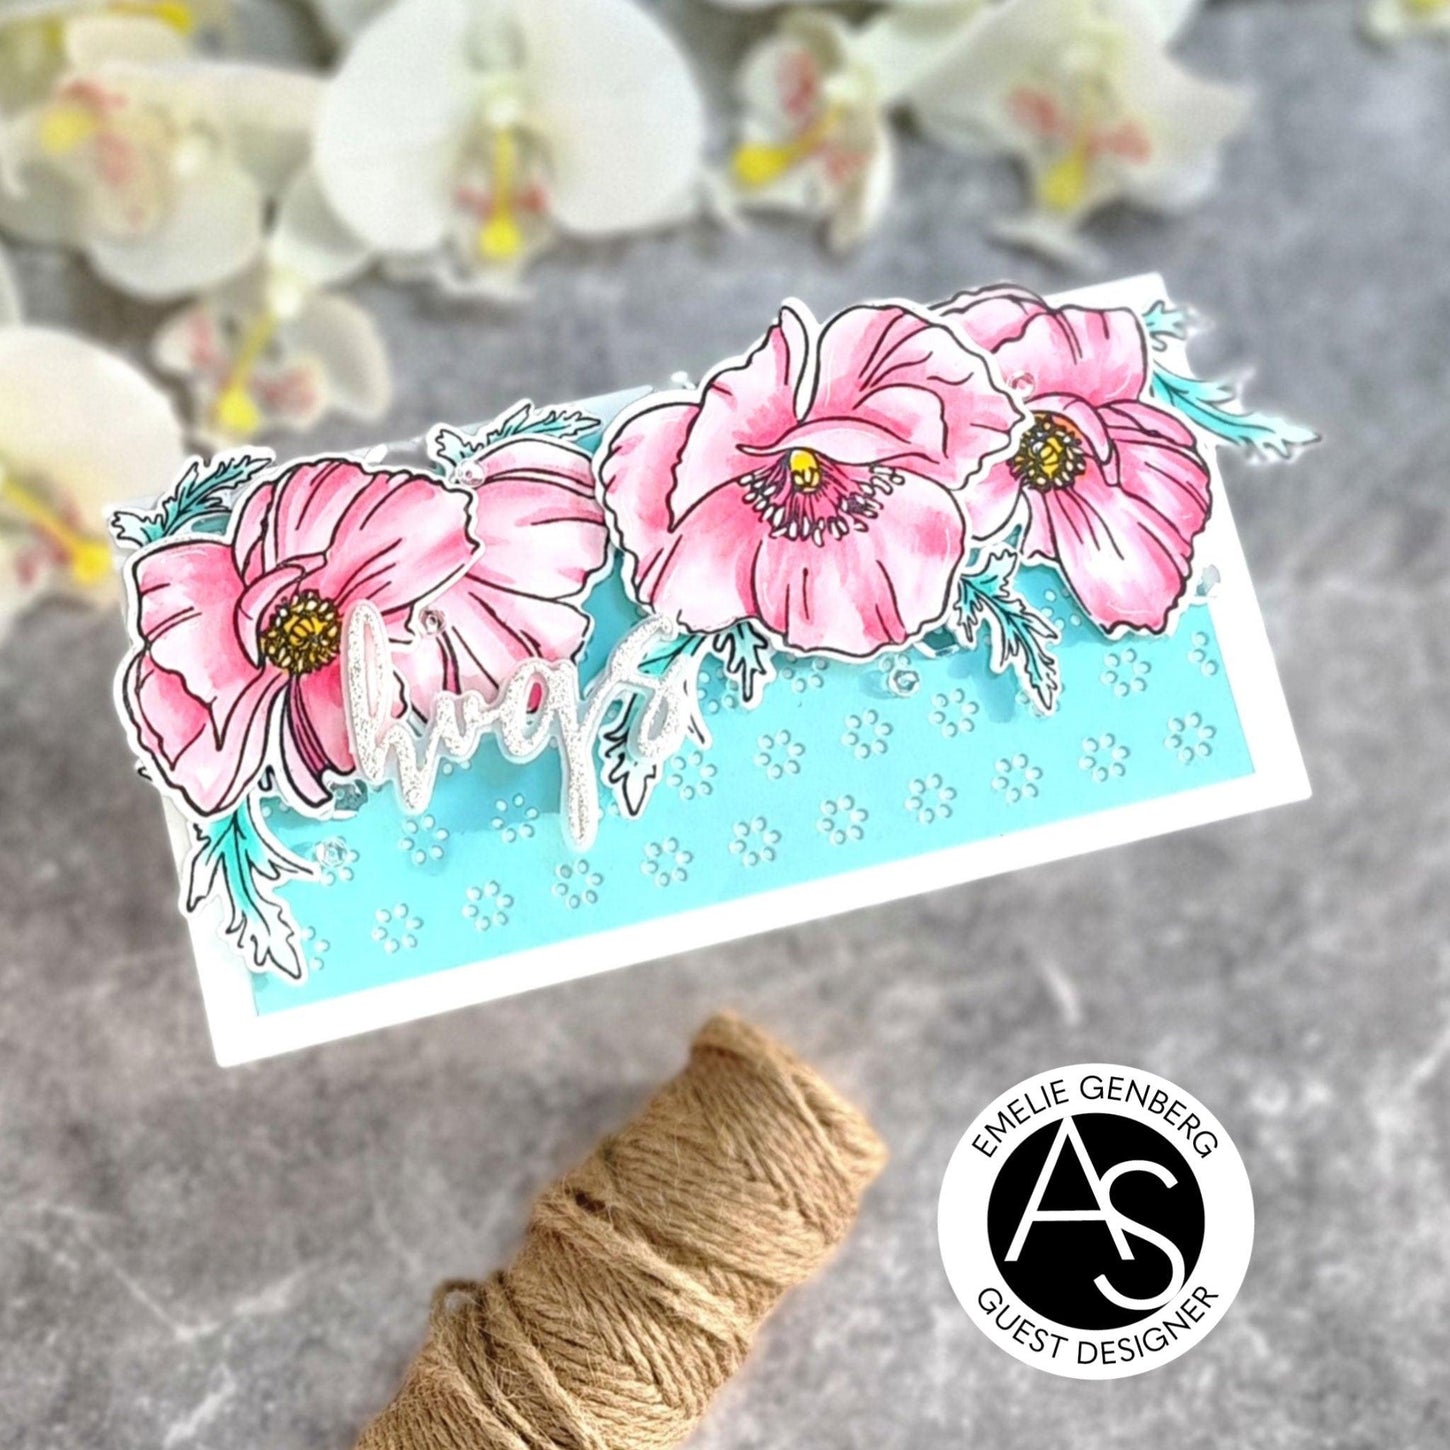 Cindy-Poppies-Stamp-alex-syberia-designs-flowers-cardmaking-coloring-dies-stencils-watercoloring-copic-markers